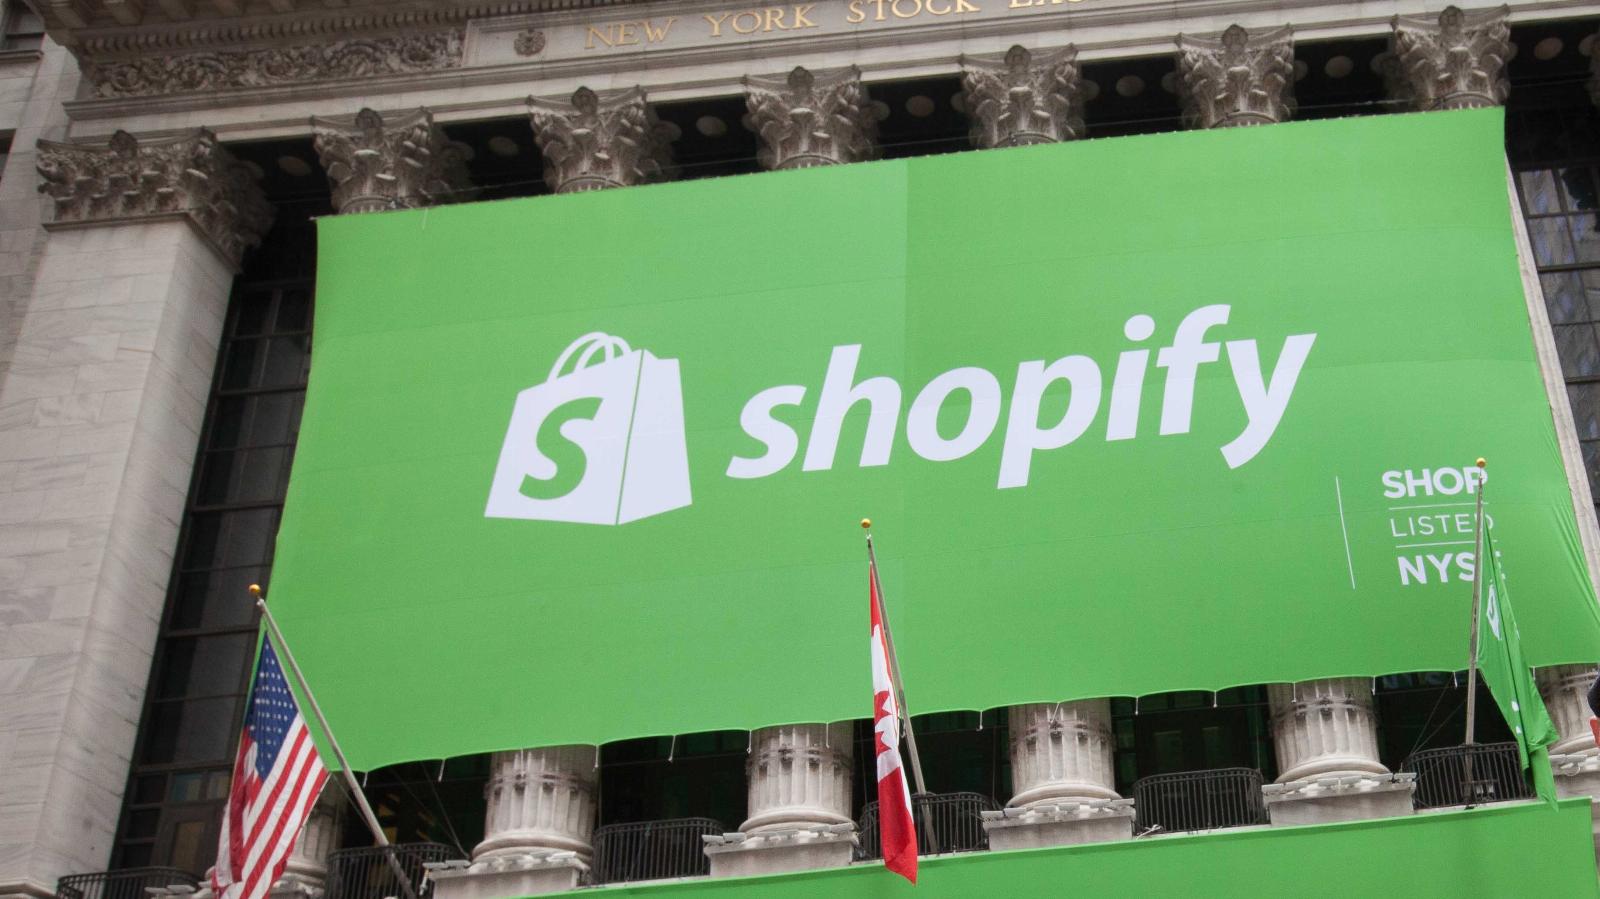 Shopify is rolling out an AI-powered image editor for products